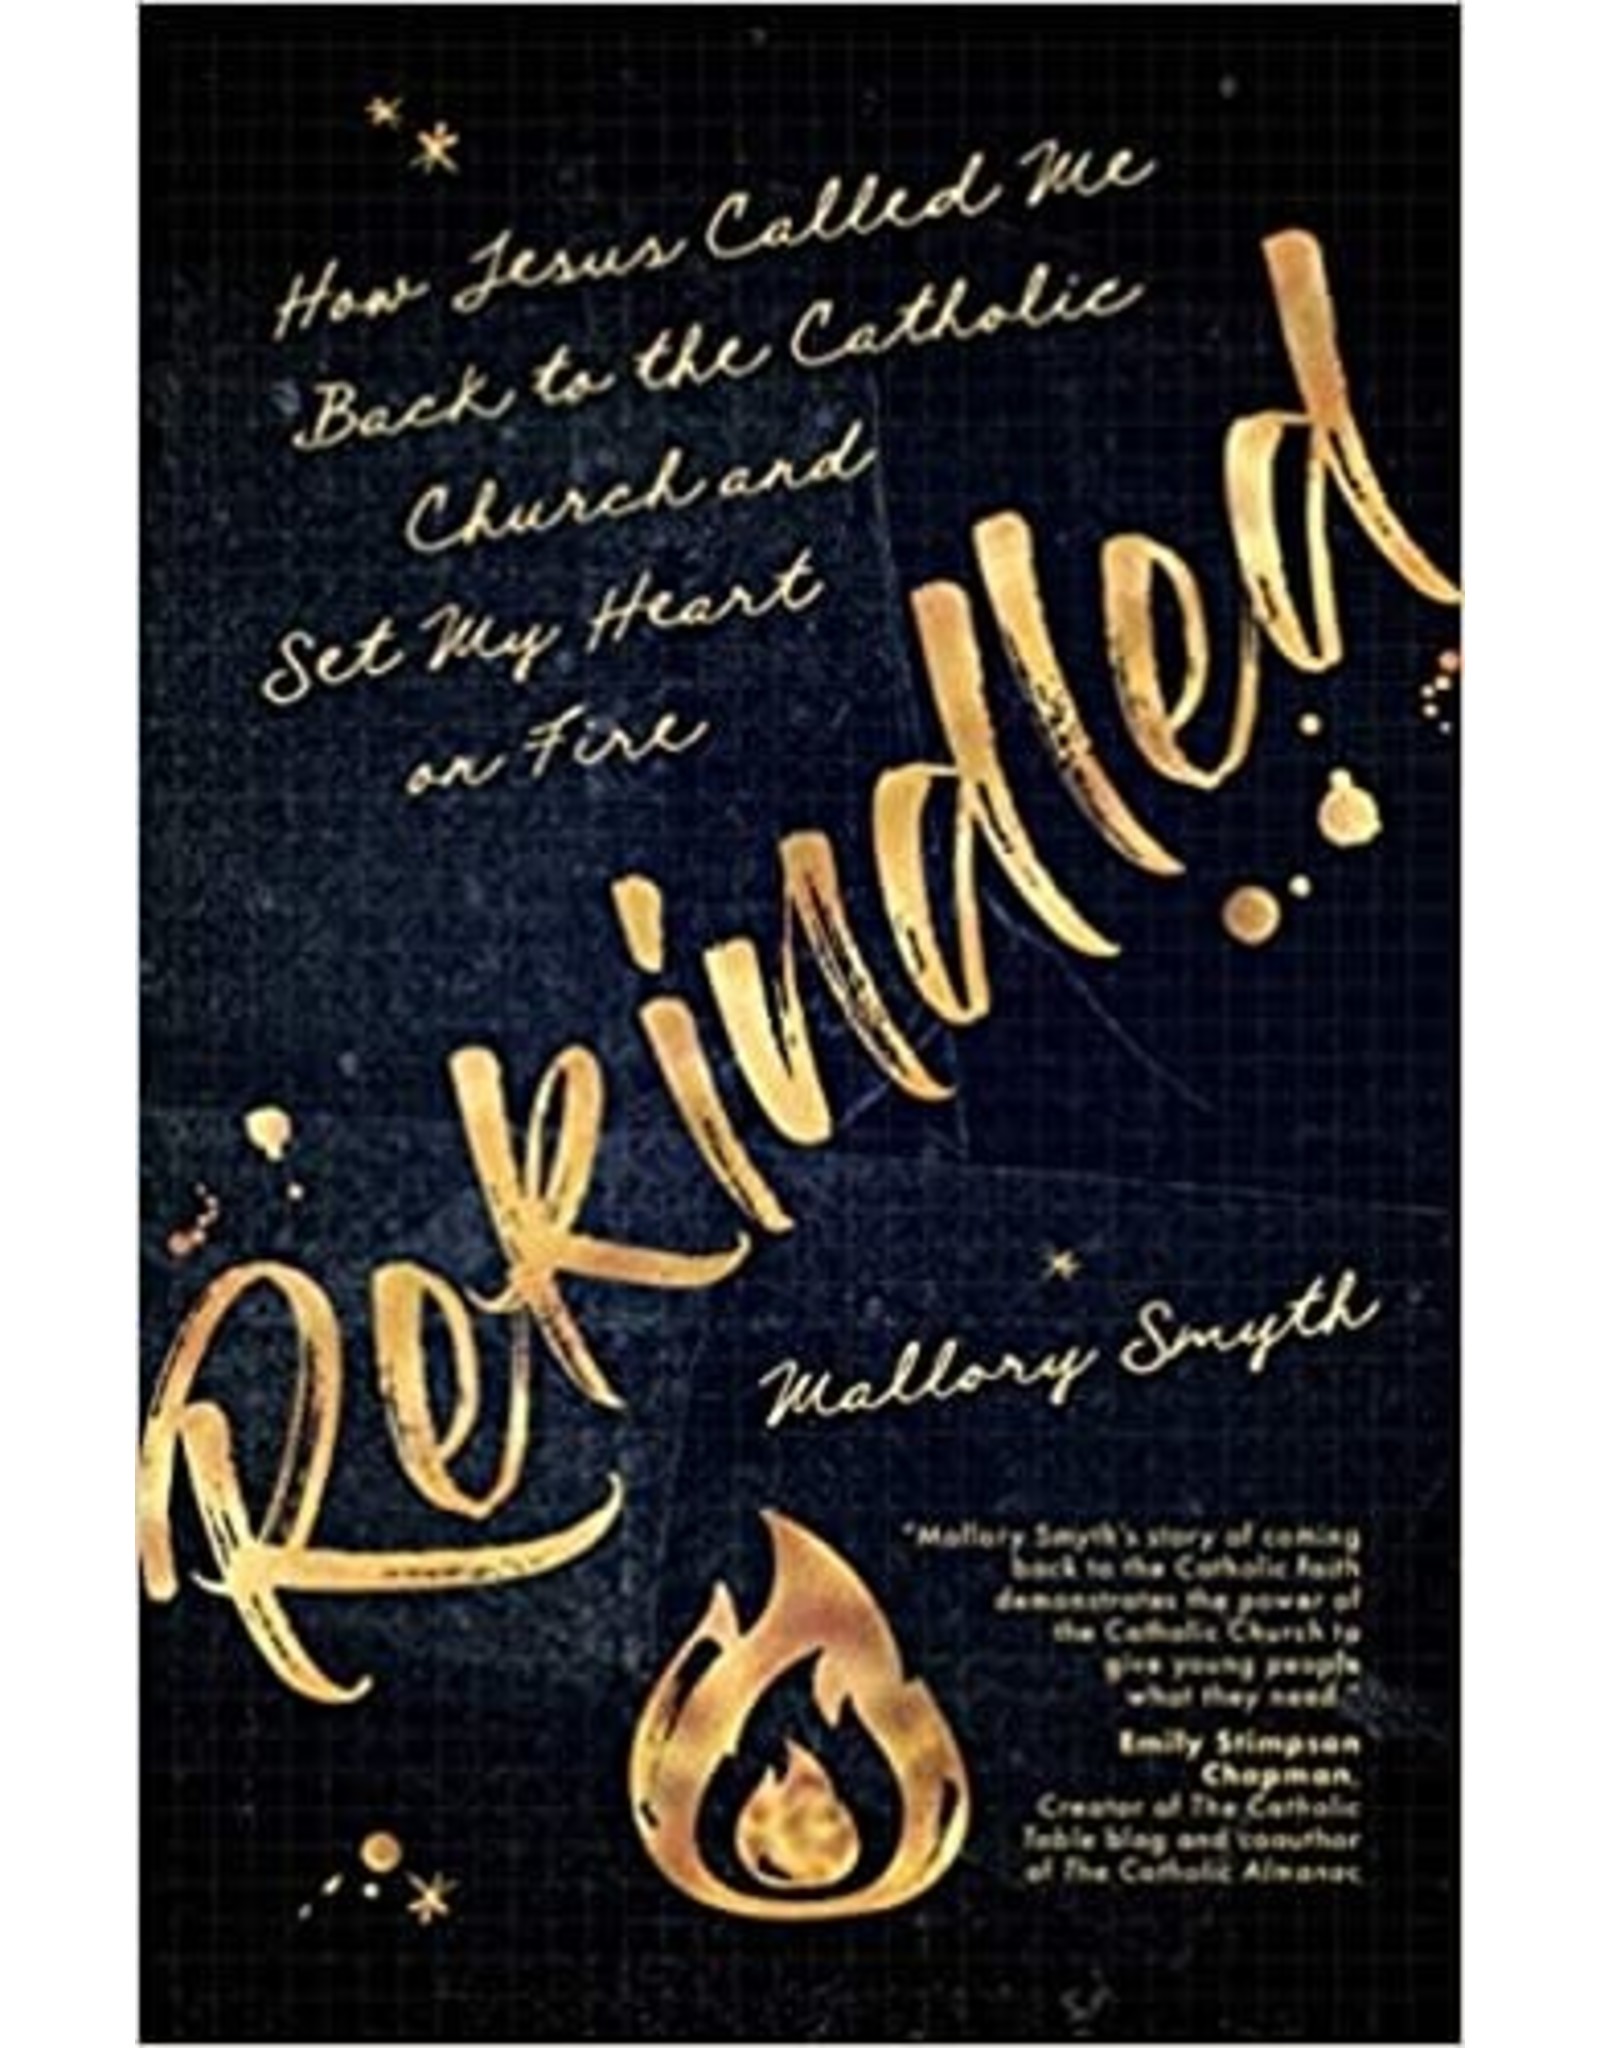 Rekindled: How Jesus Called Me Back to the Catholic Church and Set My Heart on Fire